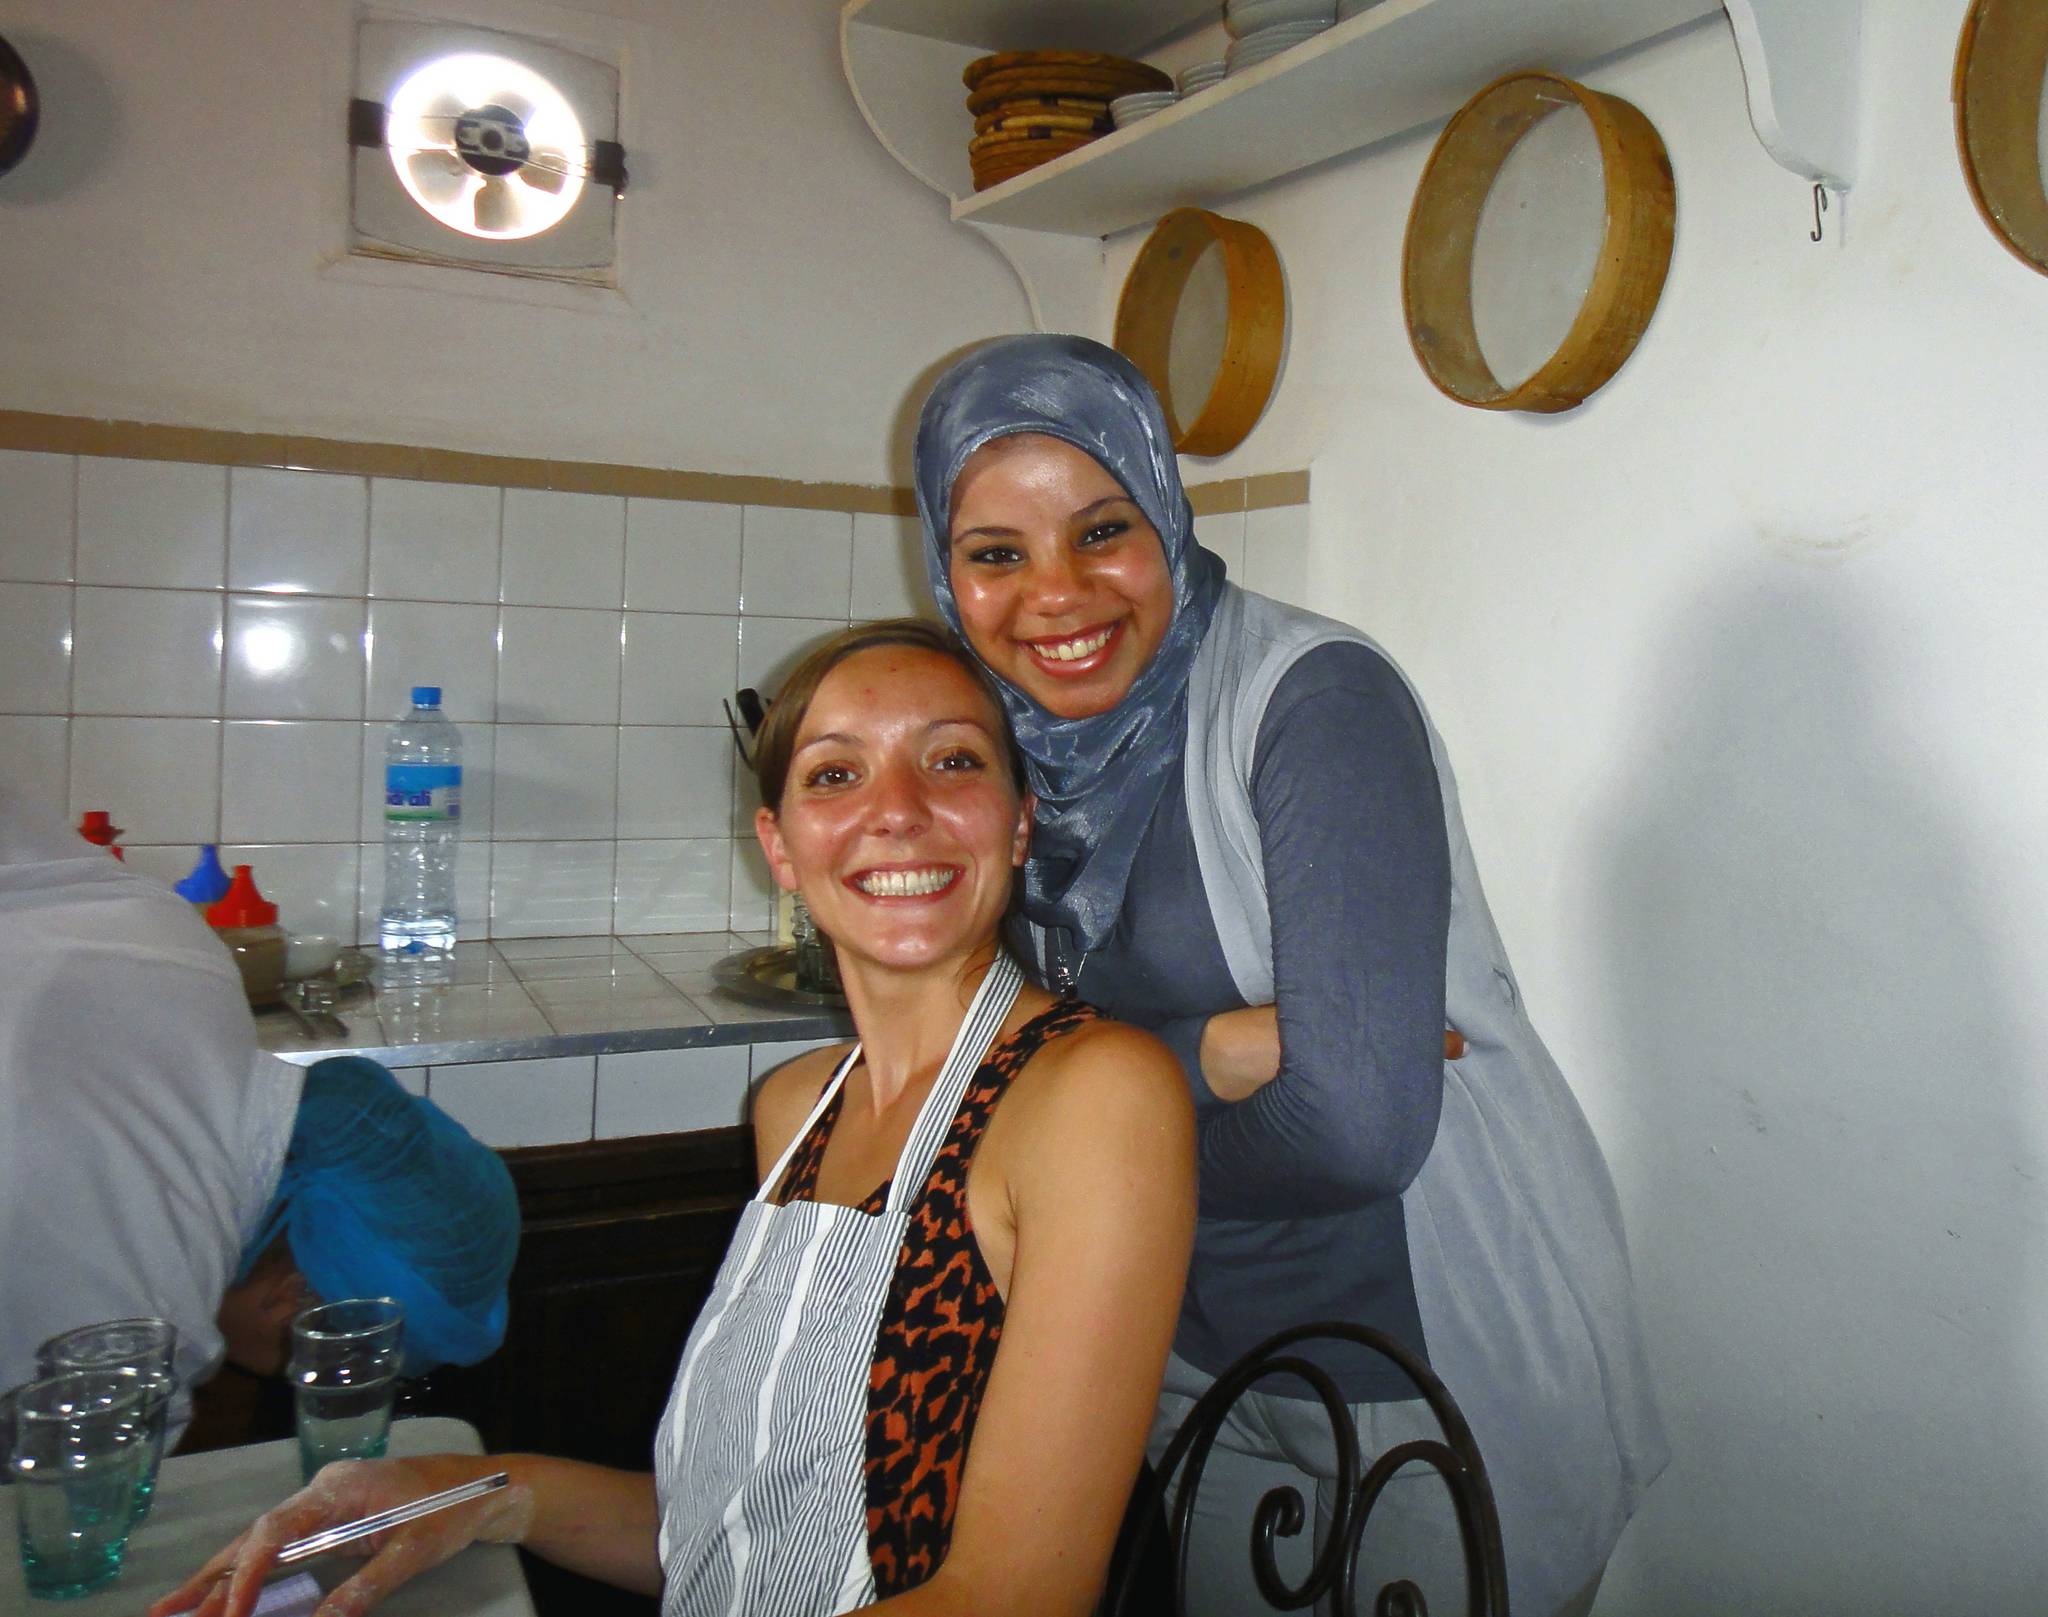 Germans create an airbnb for refugees